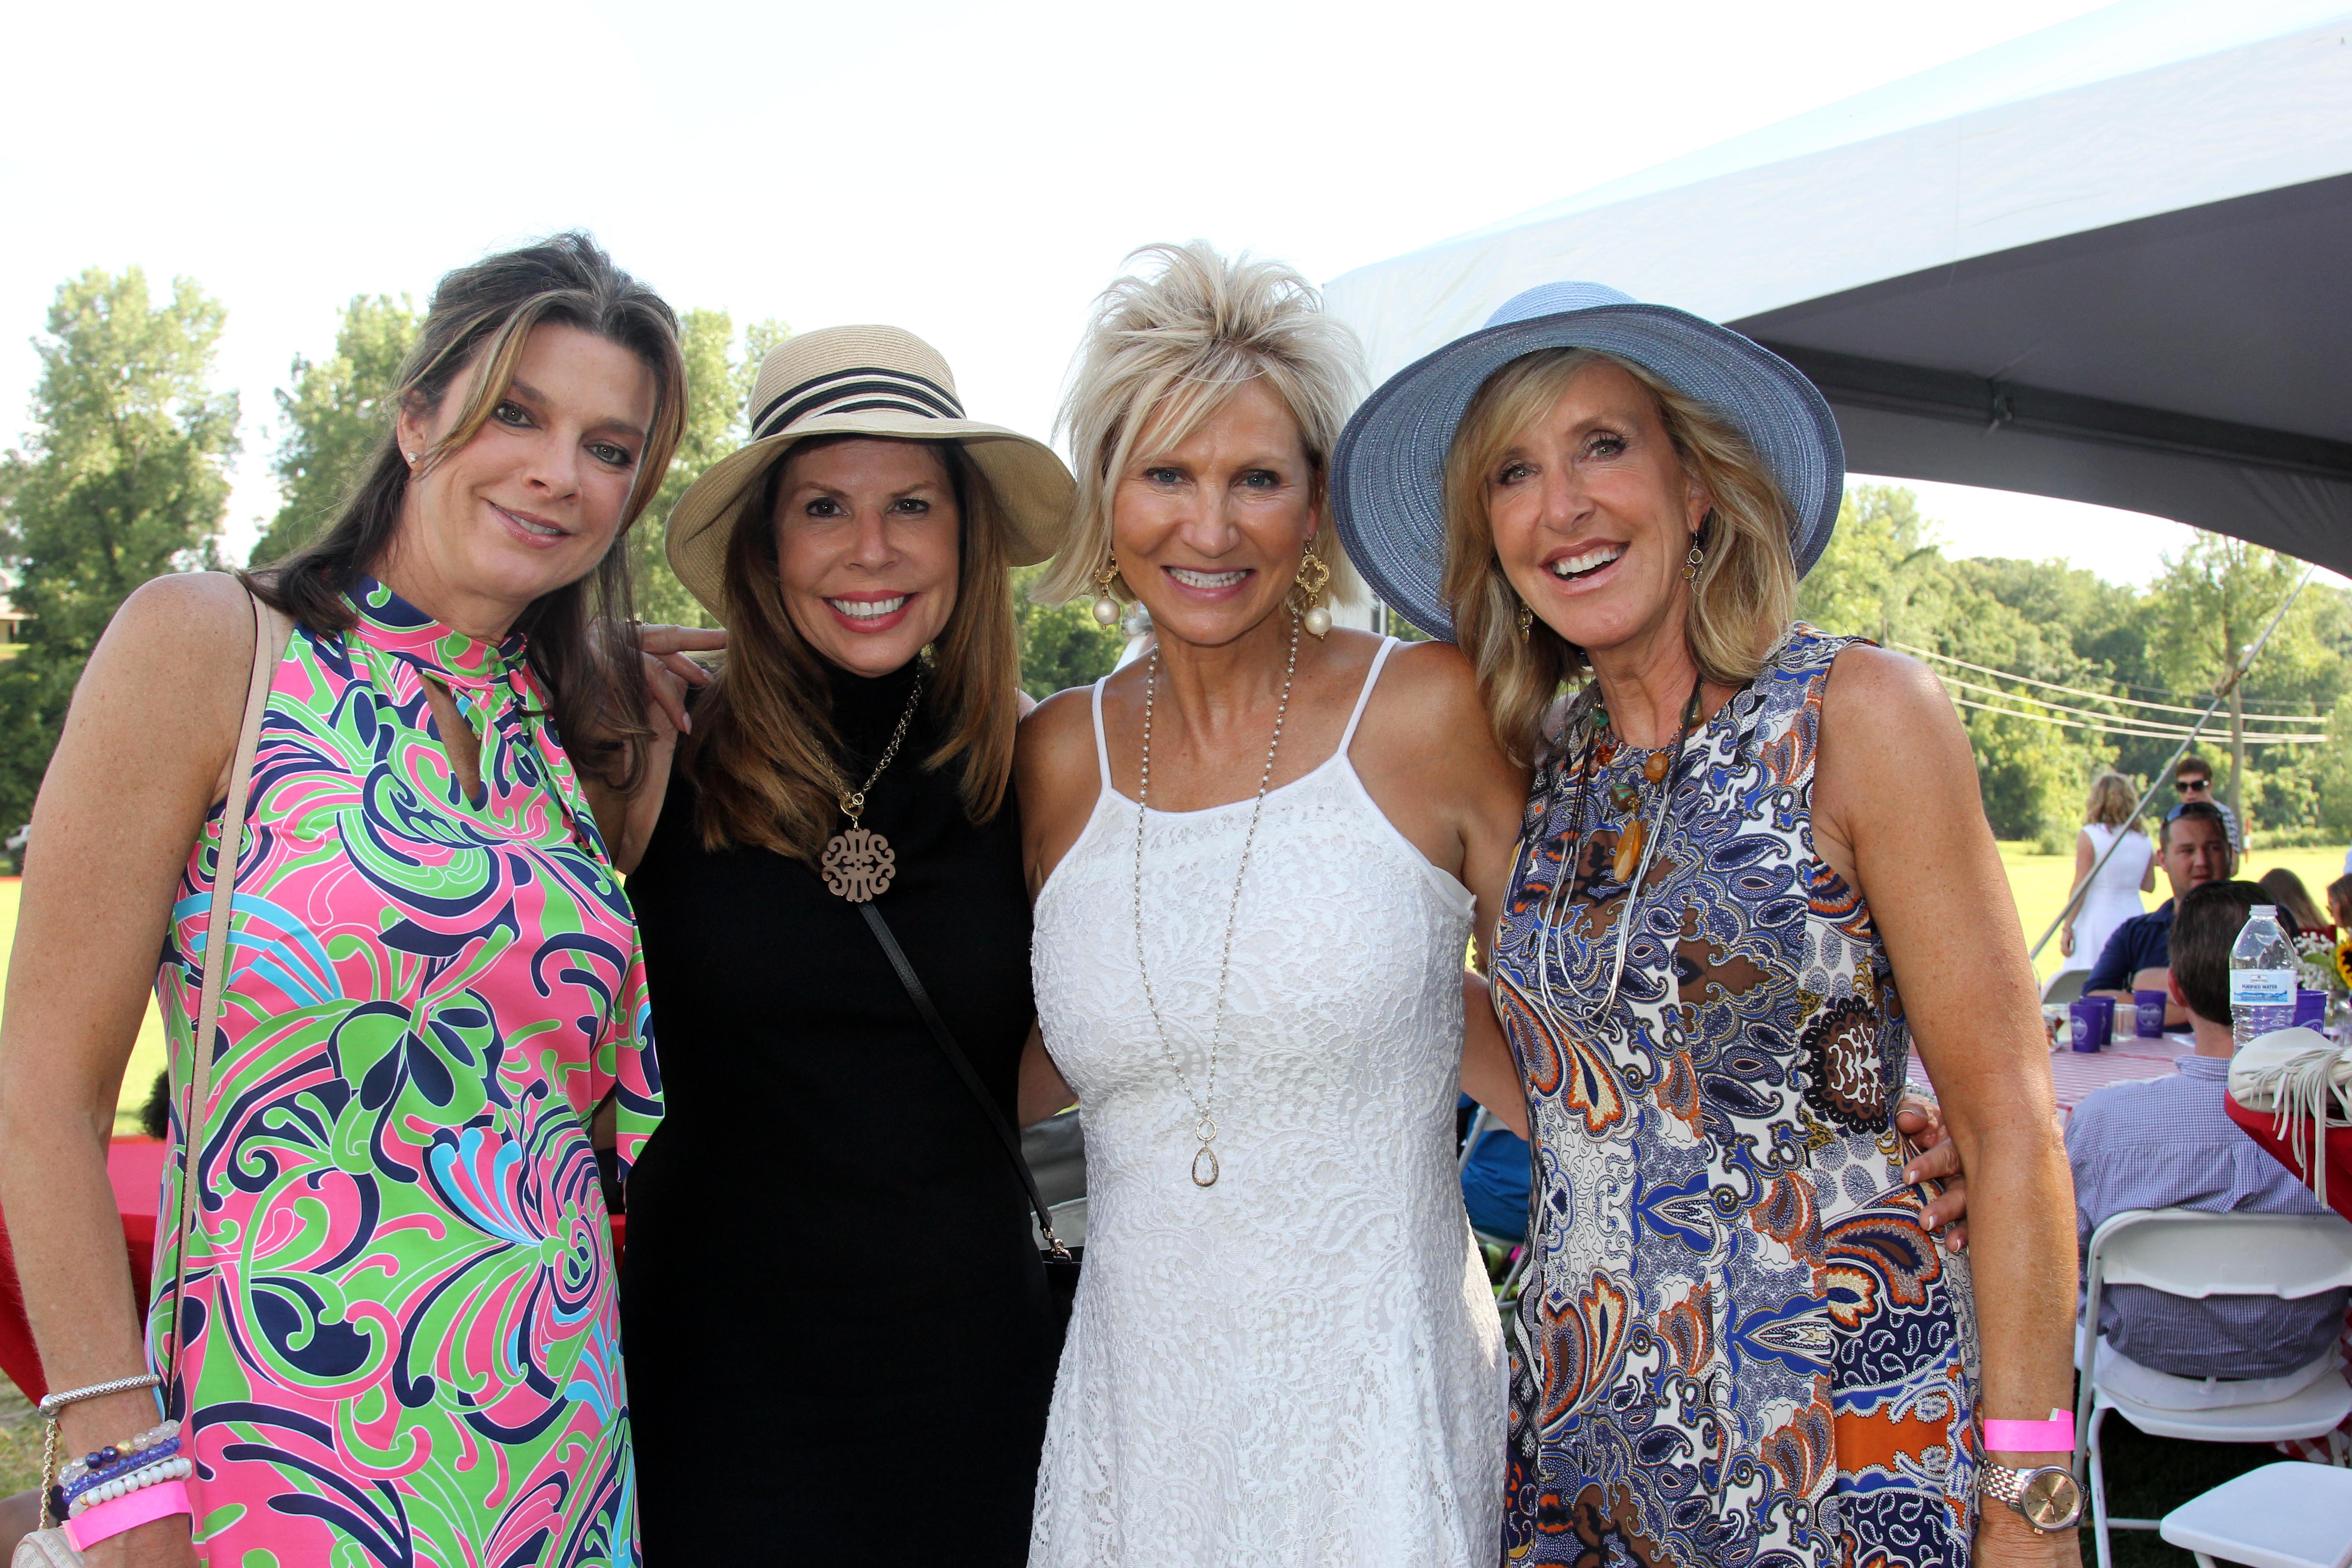 Gateway to Hope 2nd Annual Polo Match